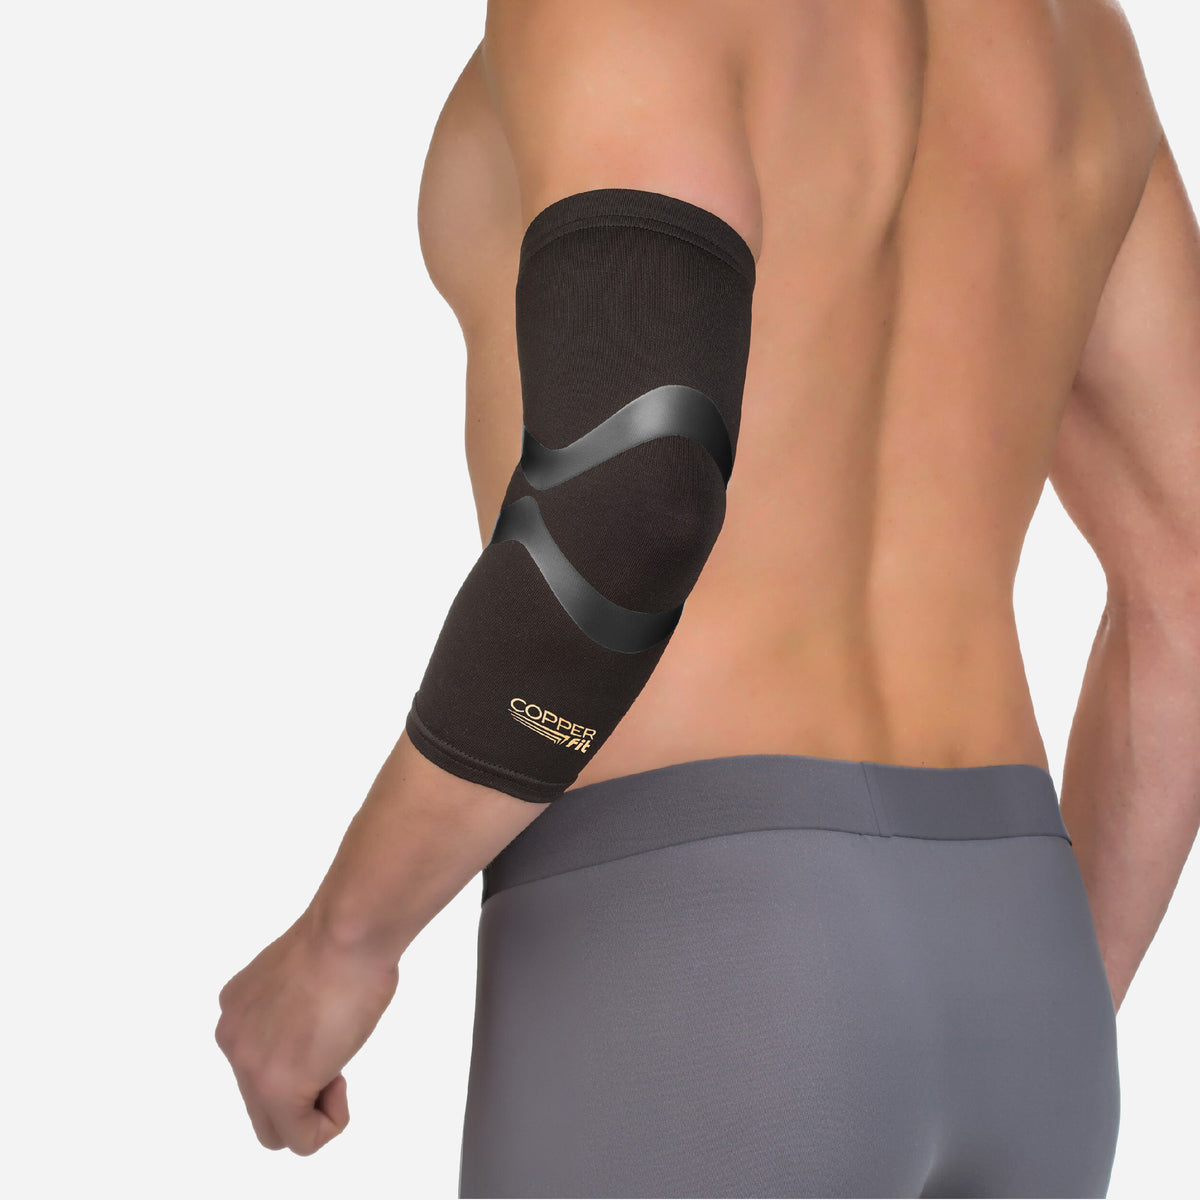  David Copper Compression Recovery Elbow Sleeve